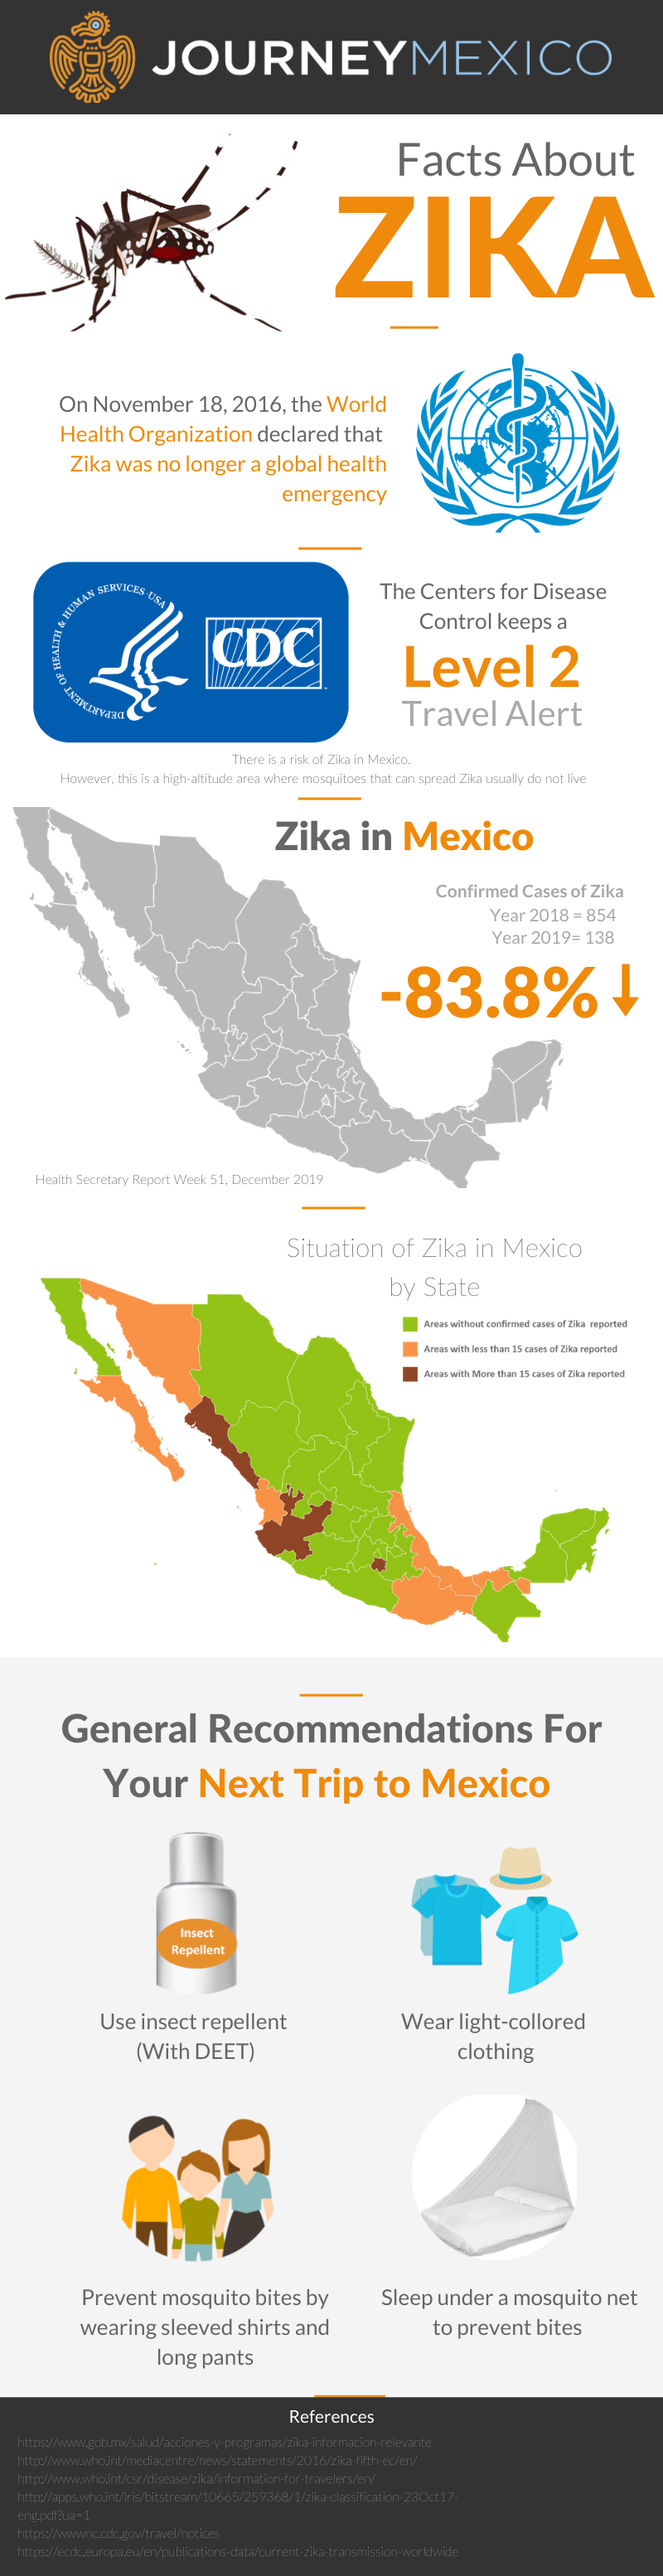 zika cases in mexico map The Zika Virus In Mexico What You Need To Know Journey Mexico zika cases in mexico map